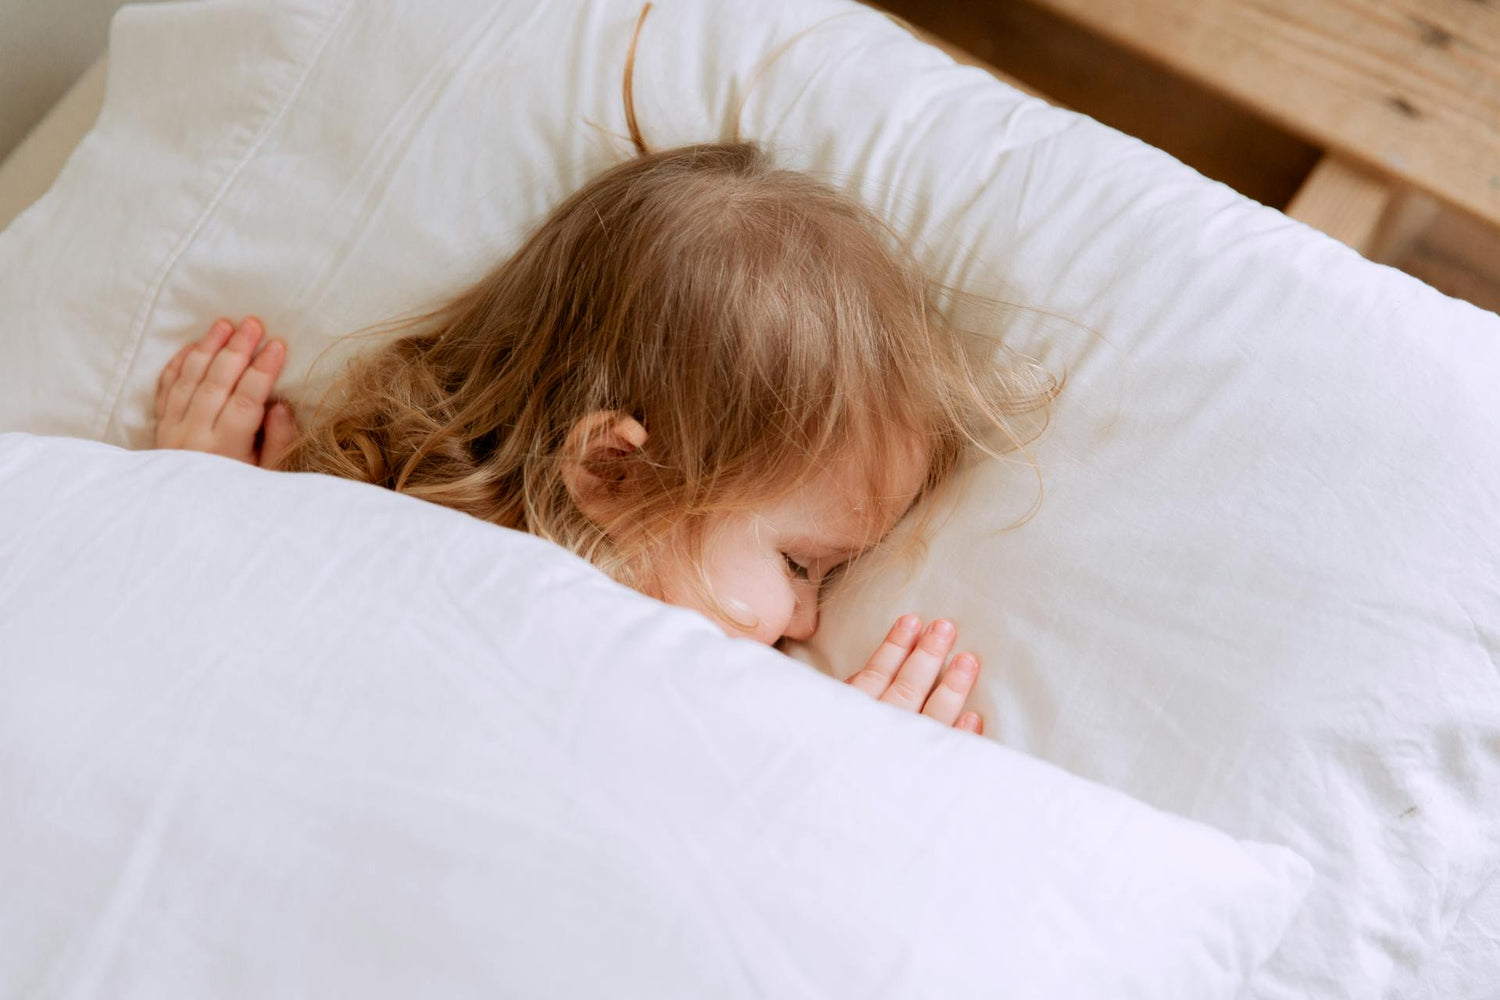 The Psychology of Comfort: How Kids' Pillows Contribute to Emotional Well-being